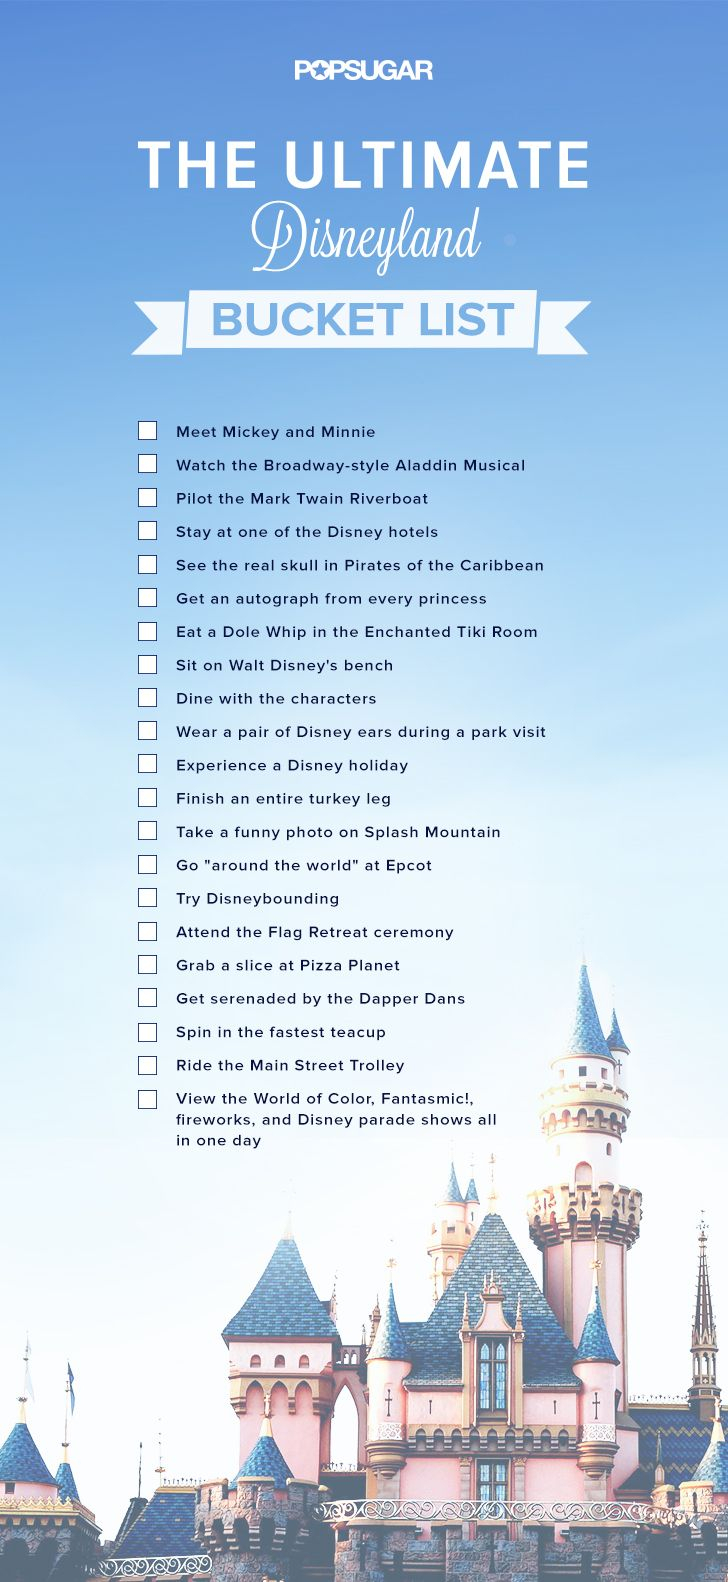 Every Disney Fan Should Complete This Incredible Bucket List